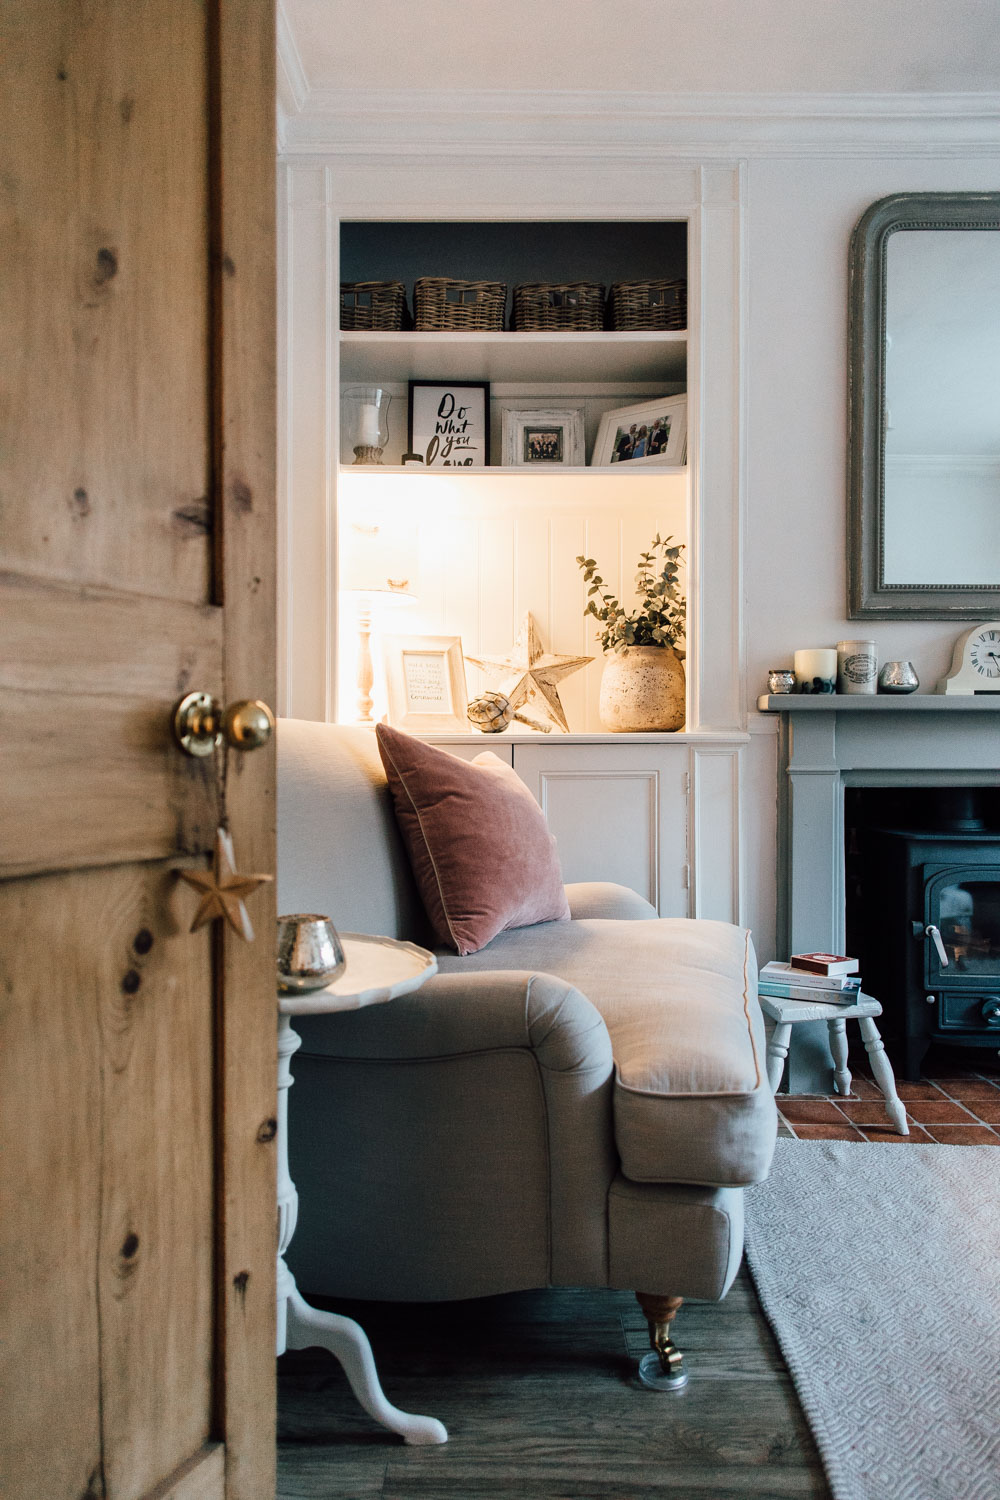 Log burner and snuggler seat in a cosy living room